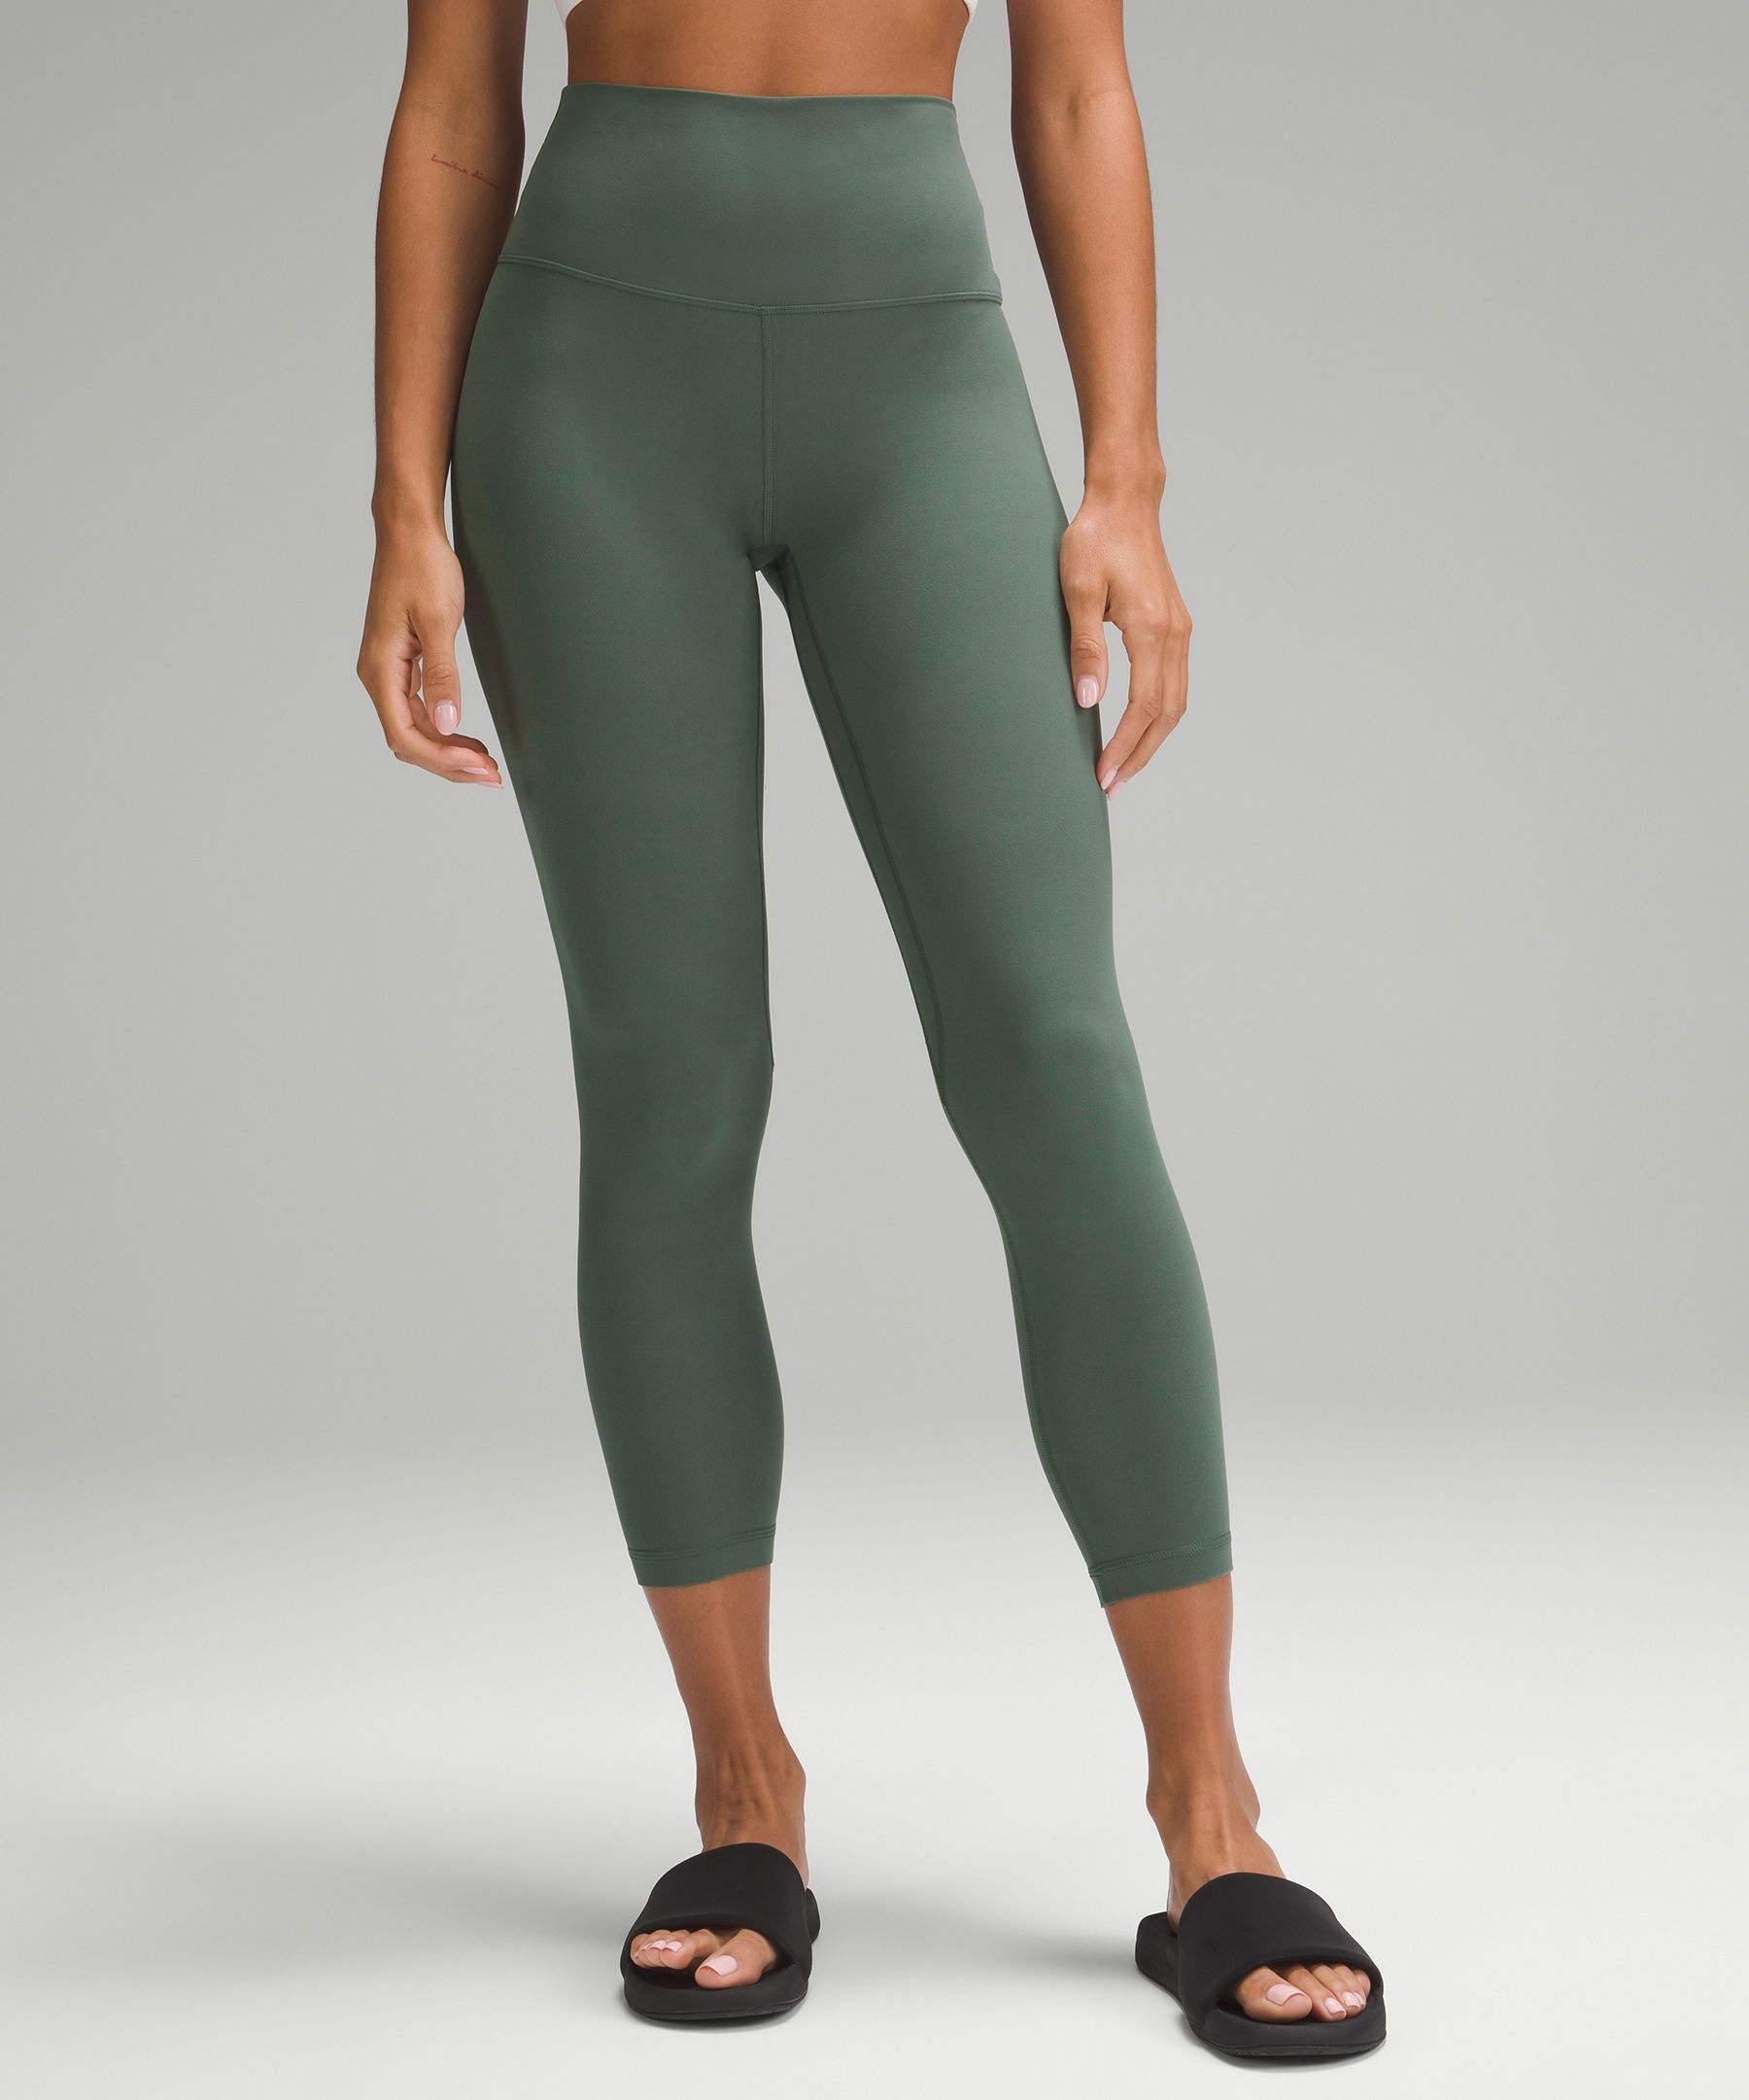 It looks like Lululemon made too much, again — 11 best styles for fall